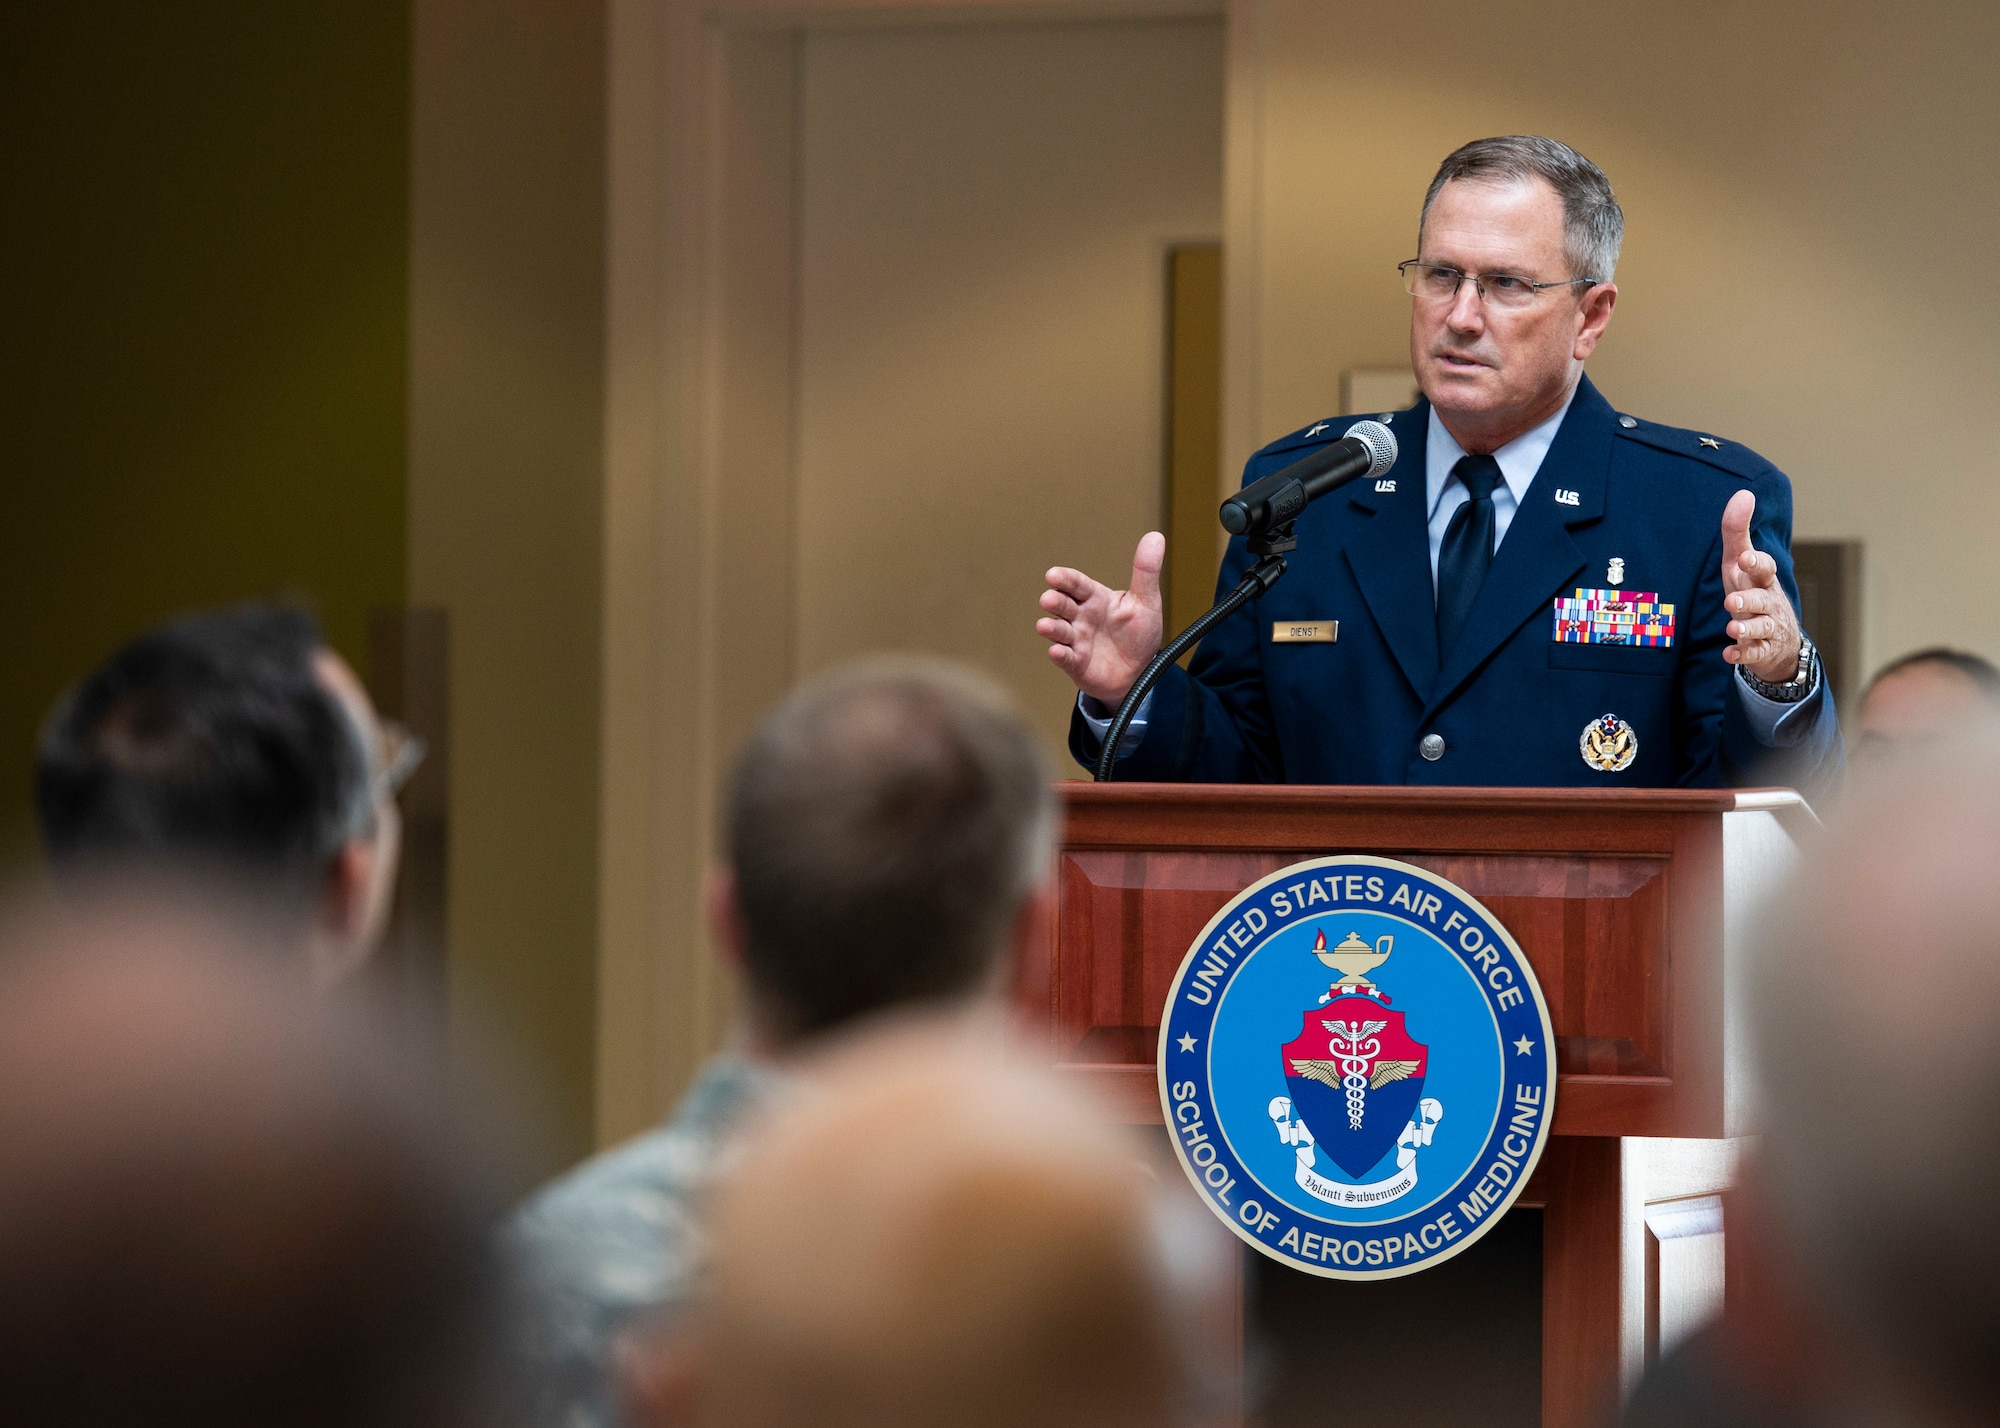 Brig. Gen. James Dienst, 711th Human Performance Wing commander, delivers opening remarks during the U.S. Air Force School of Aerospace Medicine Change of Command ceremony July 19 in the atrium of the schoolhouse. (U.S. Air Force photo/Wesley Farnsworth)